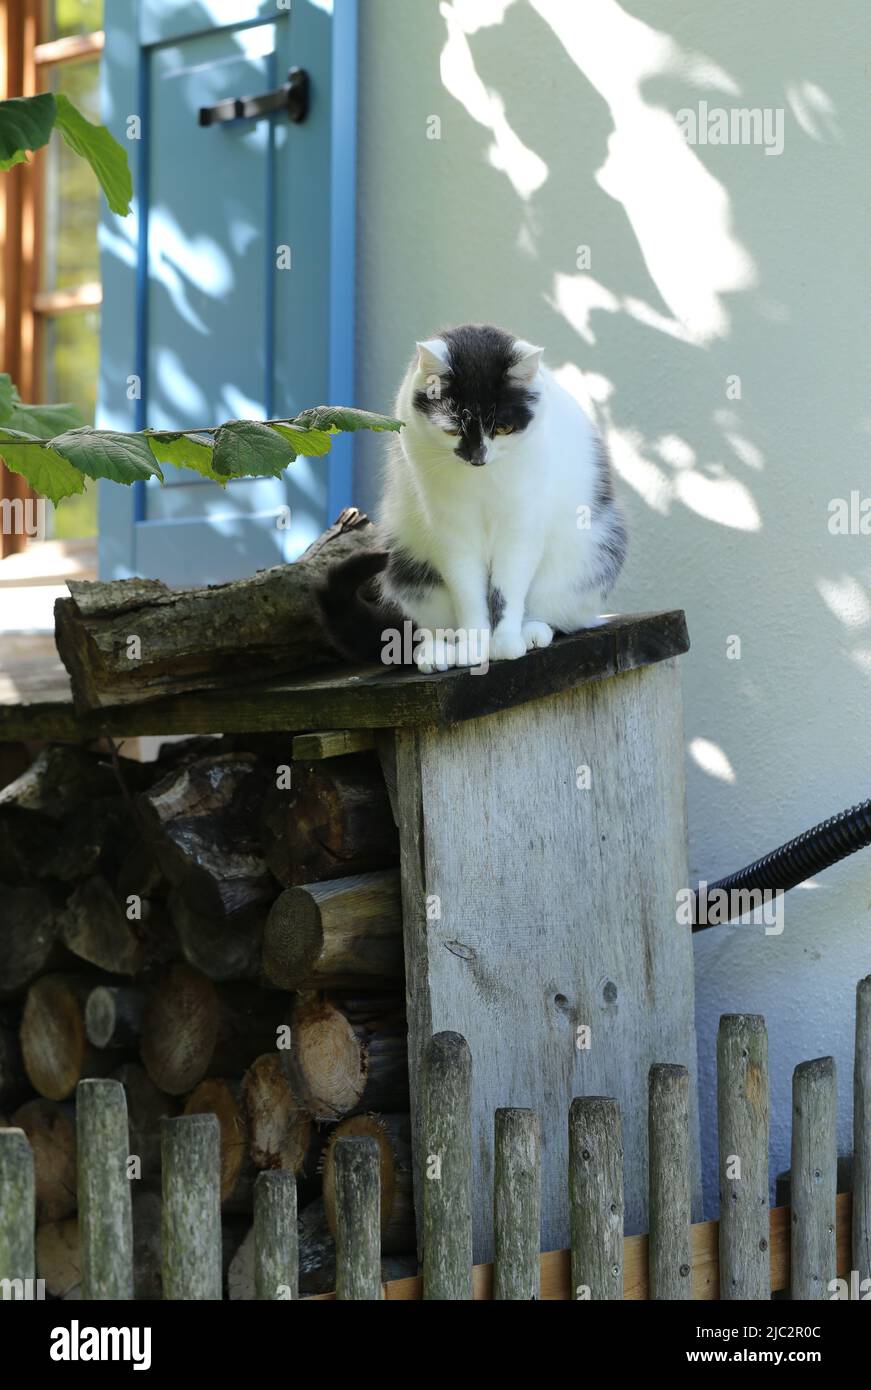 Black and white cat sitting on a pile of wood Stock Photo